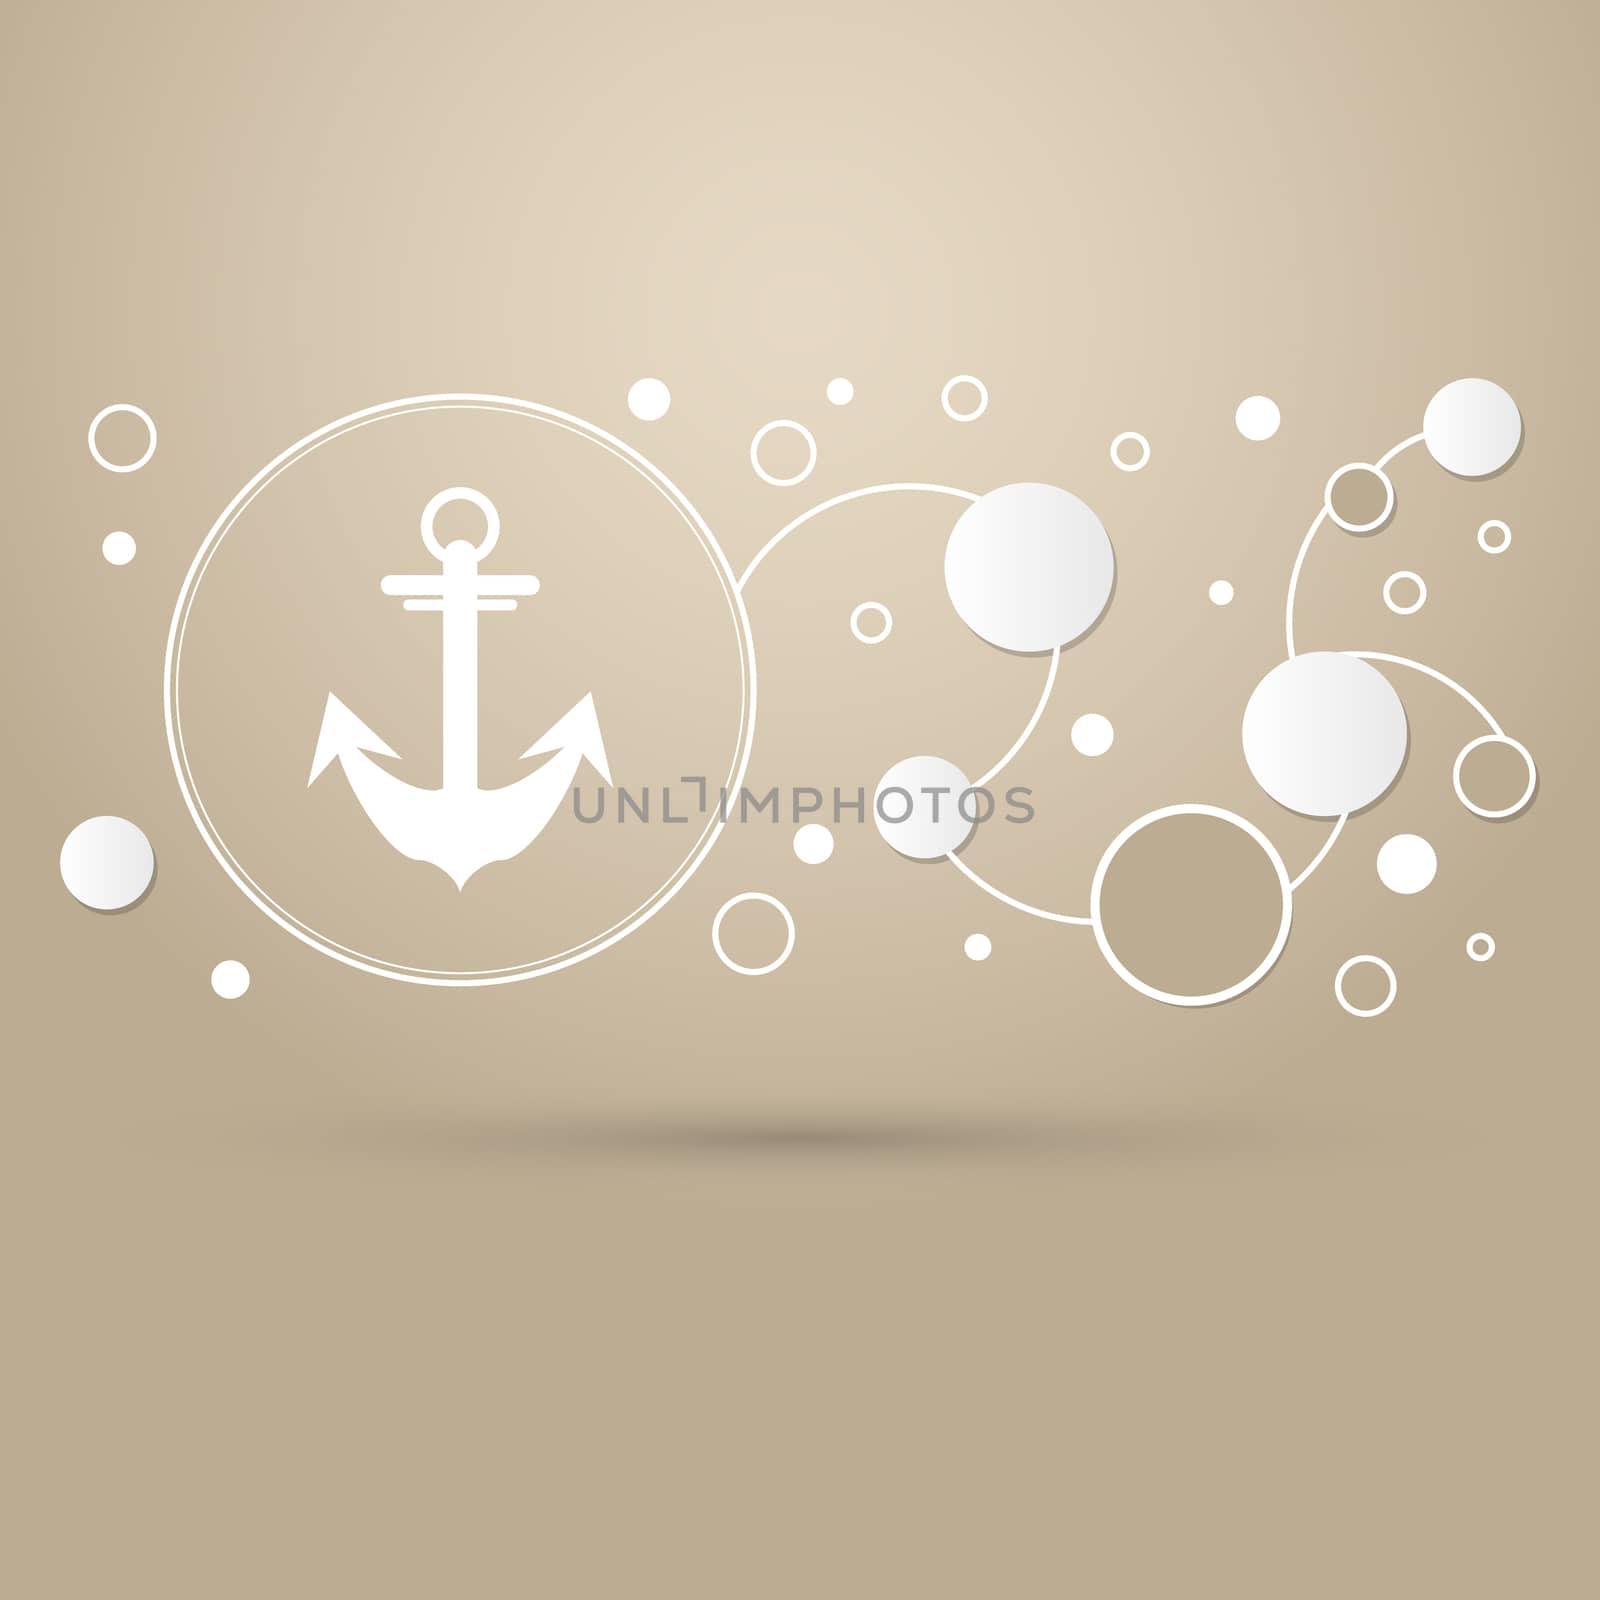 Anchor icon on a brown background with elegant style and modern design infographic.  by Adamchuk